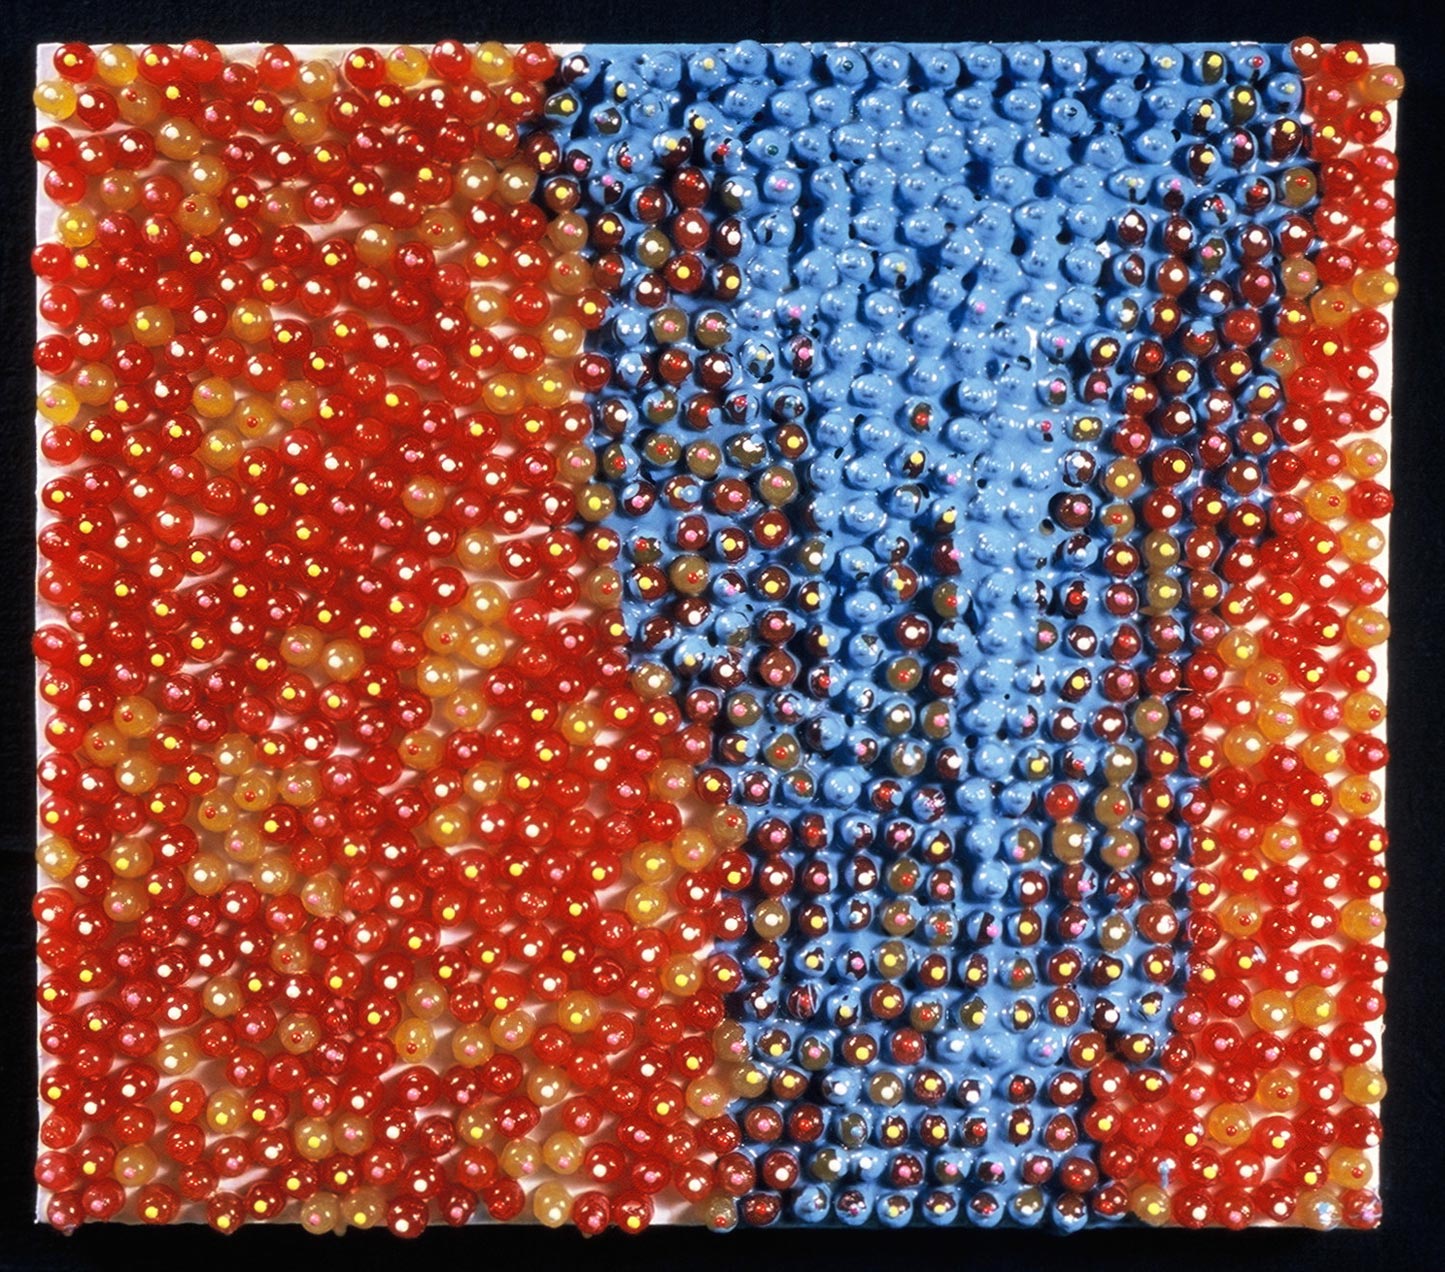  Untitled 1999 enamel and candy on panel 30 by 30 inches 